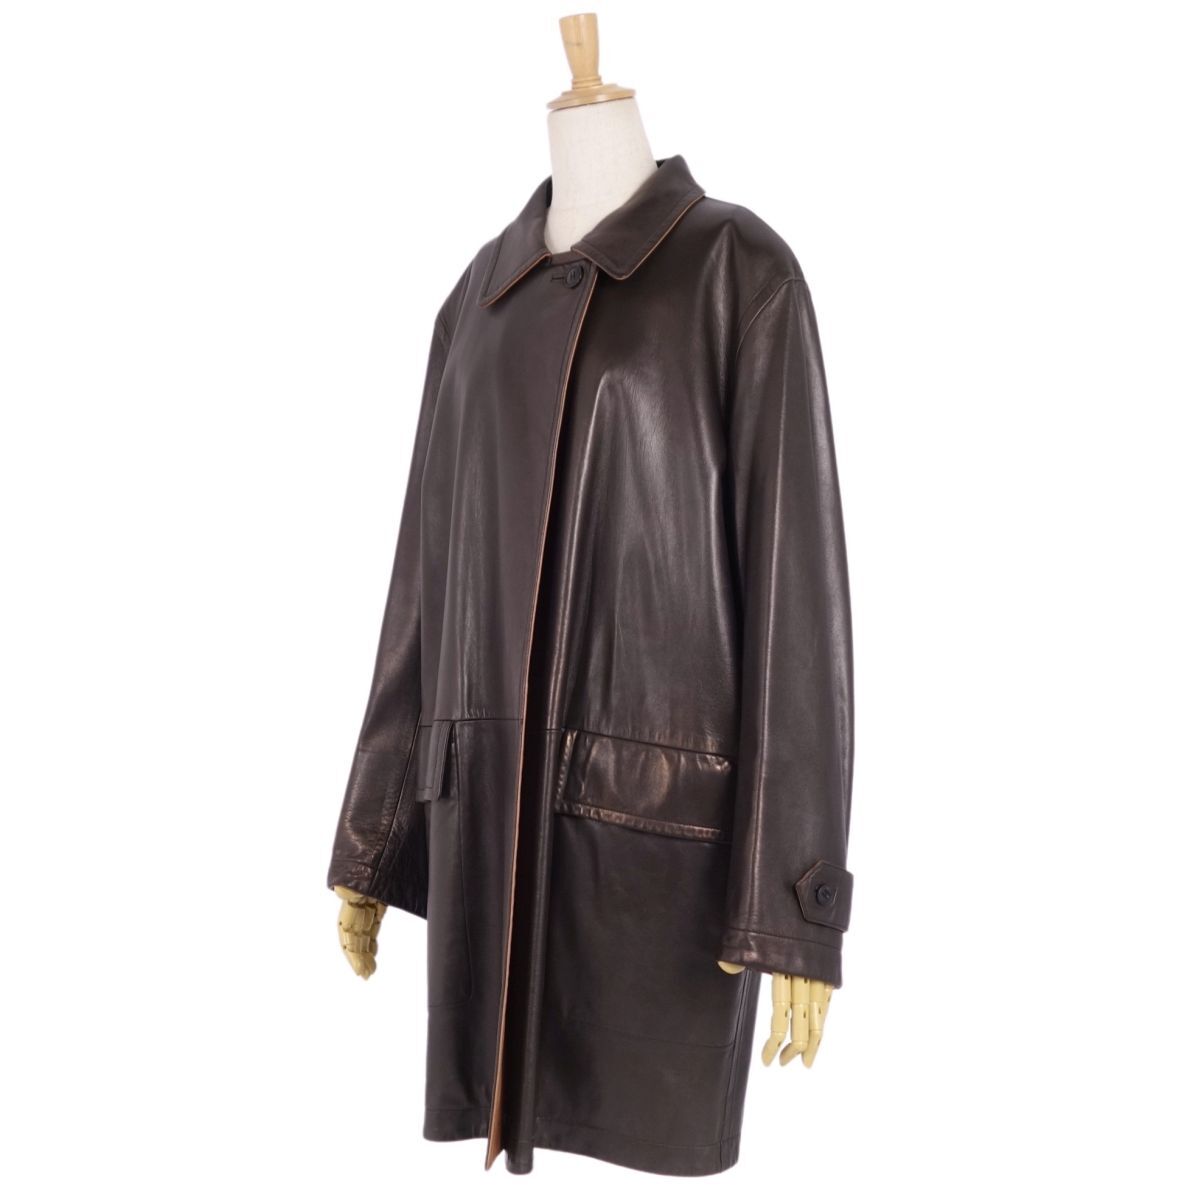  Hermes HERMES Margiela period coat leather coat reversible ram leather outer lady's 38(M corresponding ) Brown cf04ds-rm08f09912